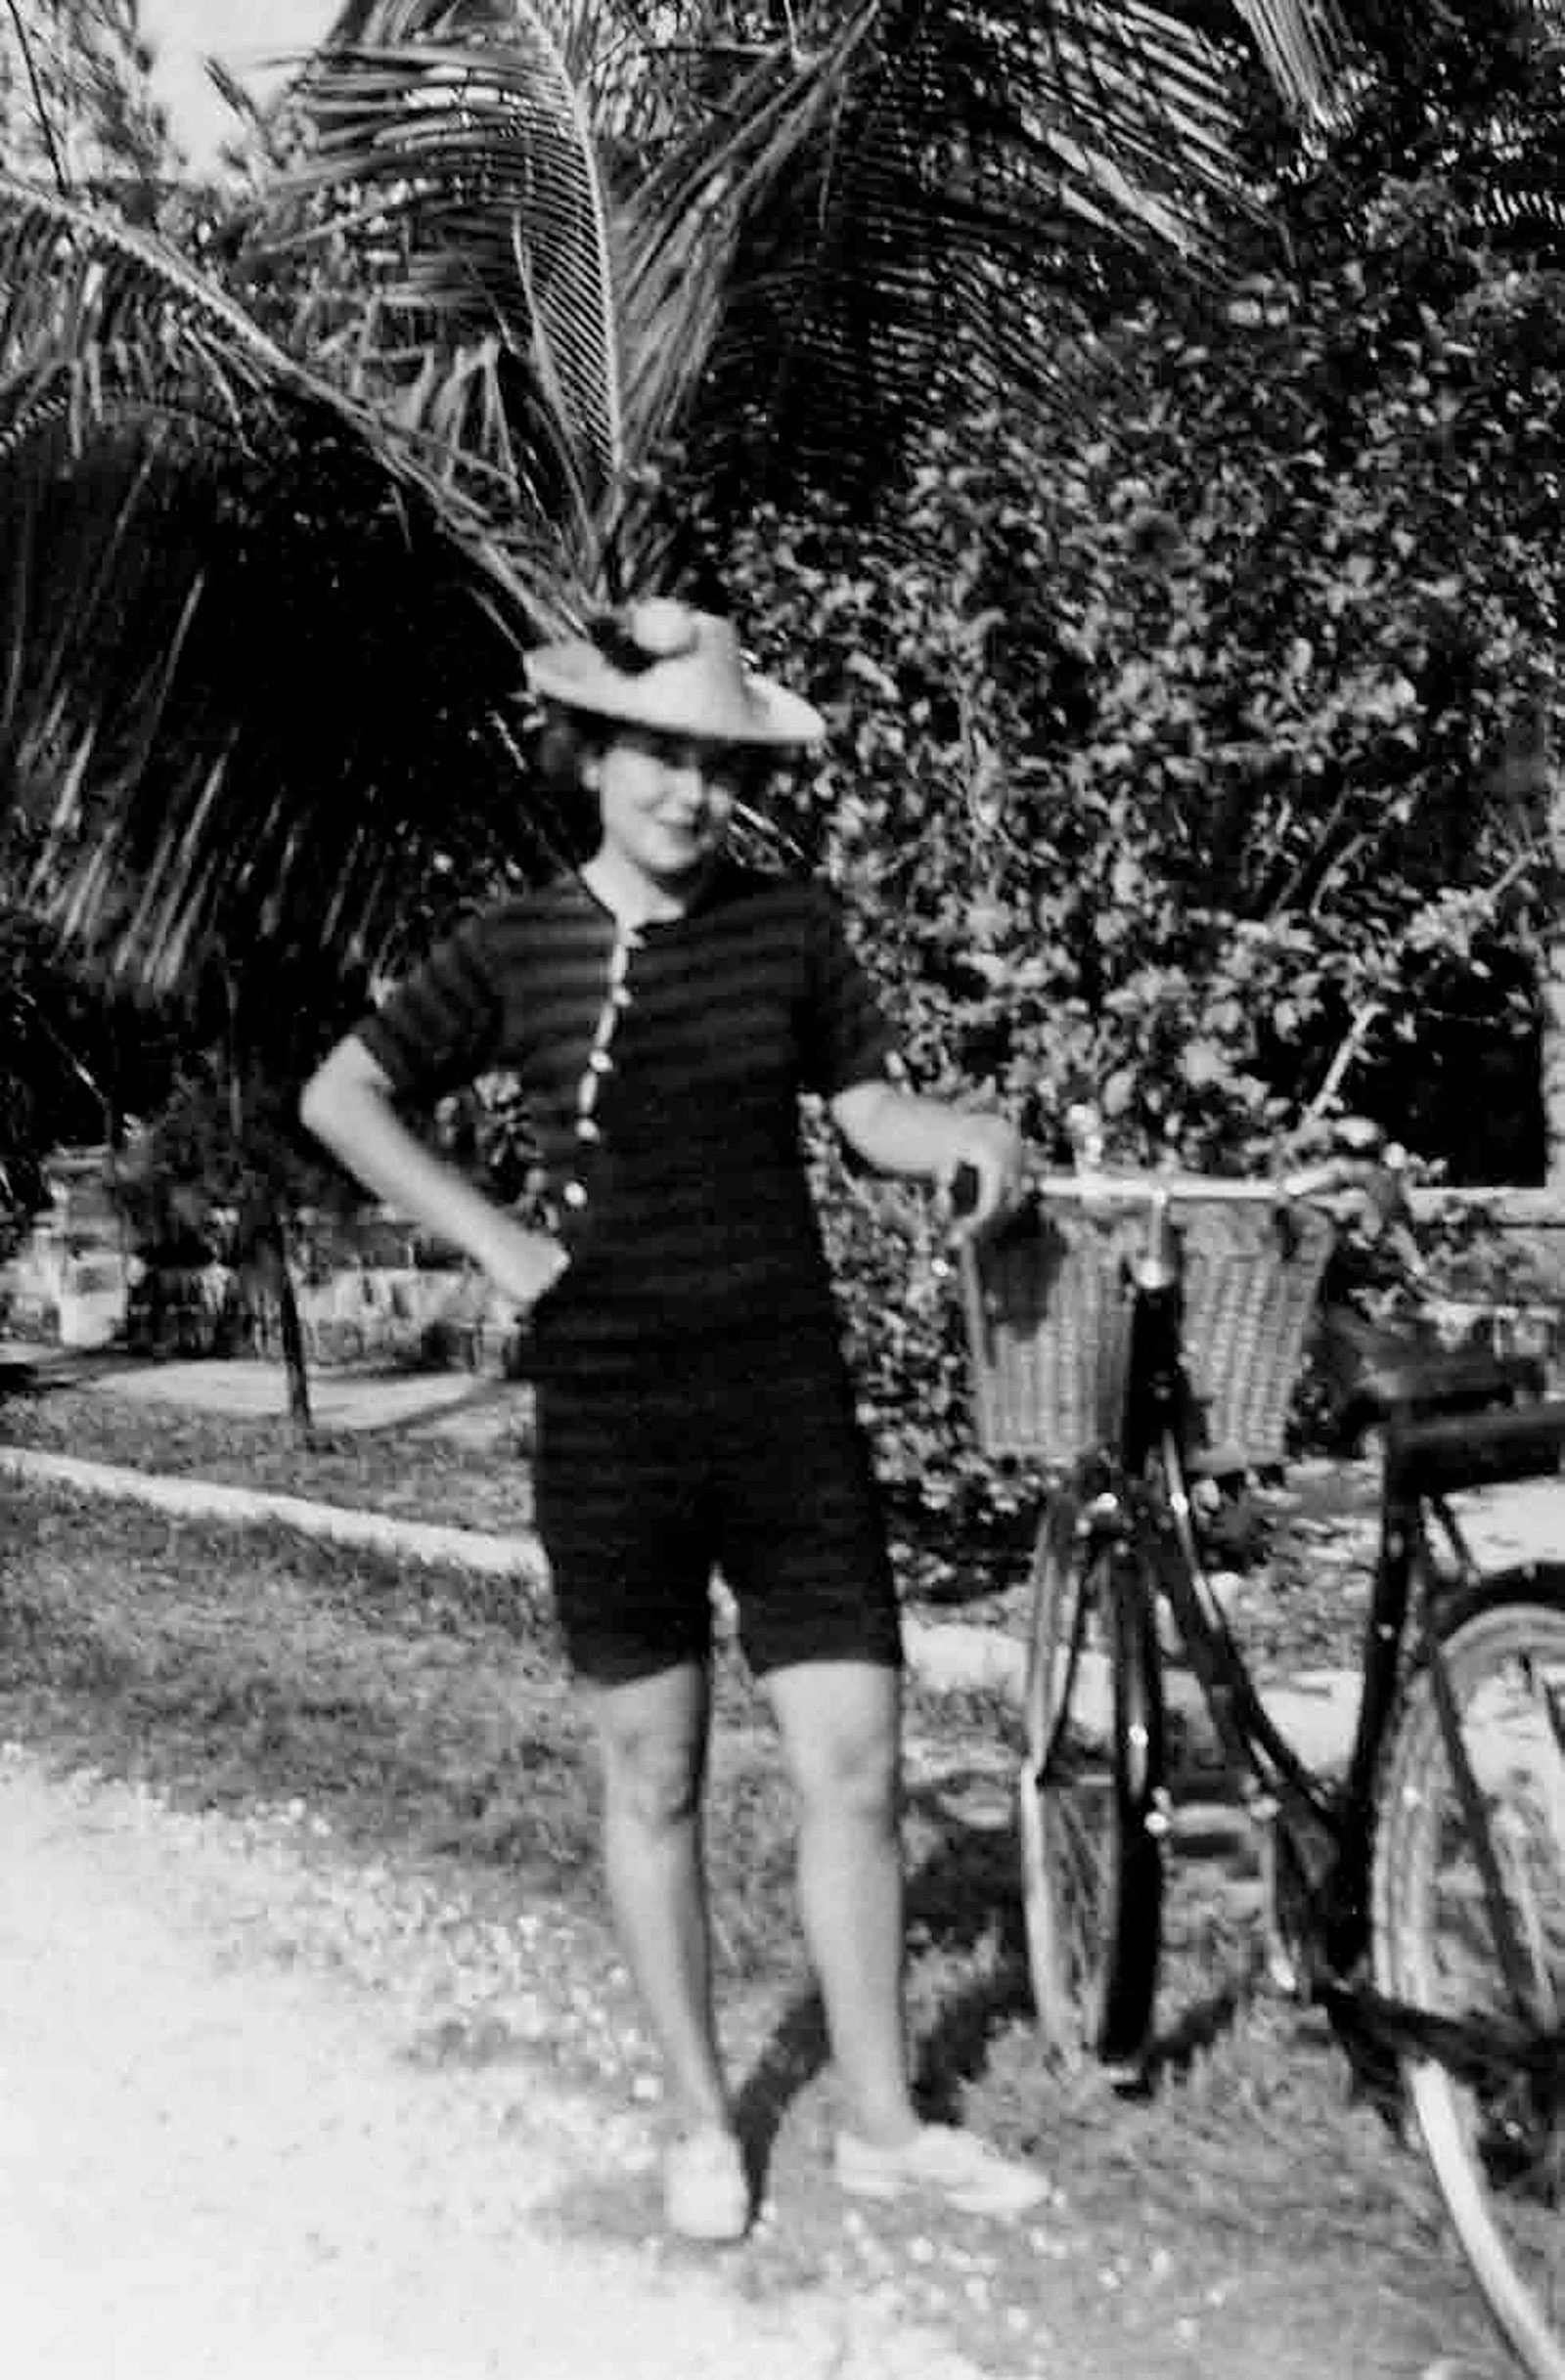 Elizabeth Bishop in Key West, Florida; undated photograph by Lloyd Frankenberg from Elizabeth Bishop: Objects and Apparitions, the catalog of an exhibition celebrating Bishop’s centenary, published by the Tibor de Nagy Gallery in 2011